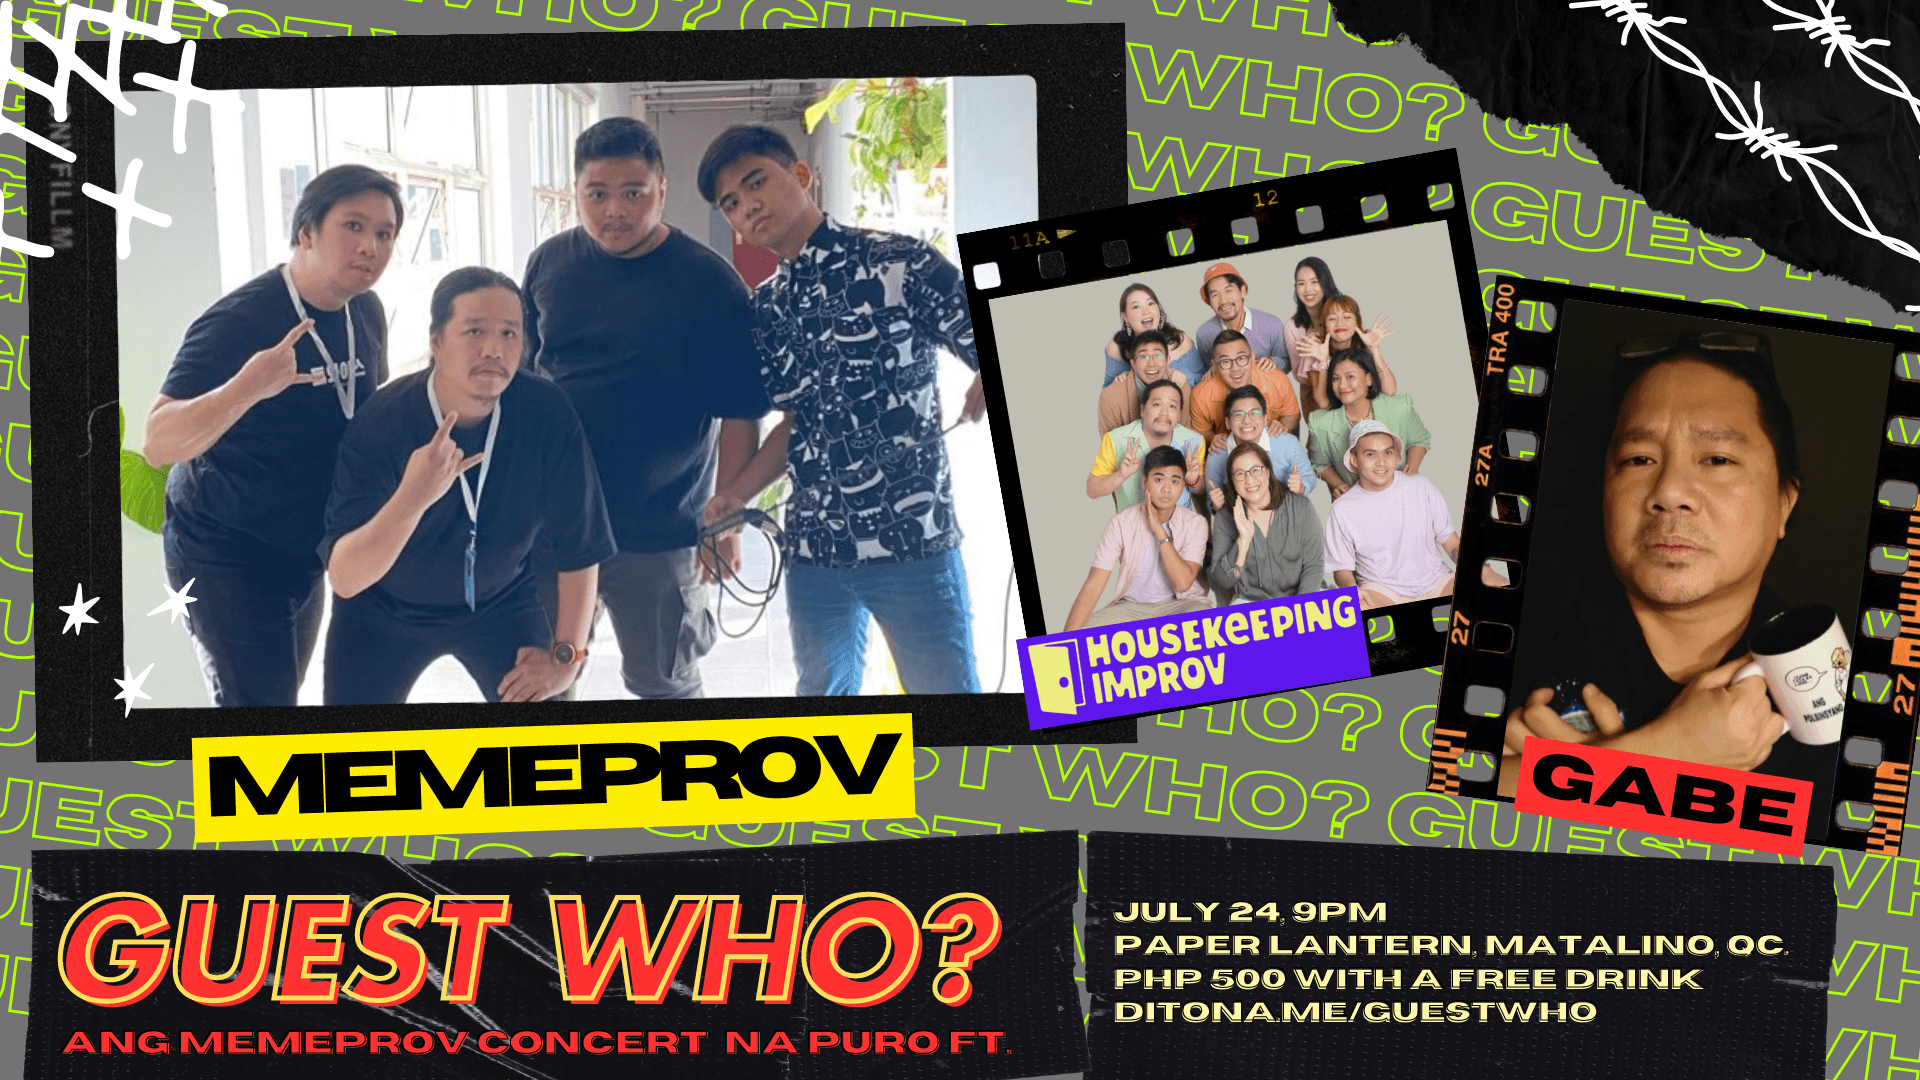 Guest Who? Ang Memeprov Concert Na Puro Ft. Poster